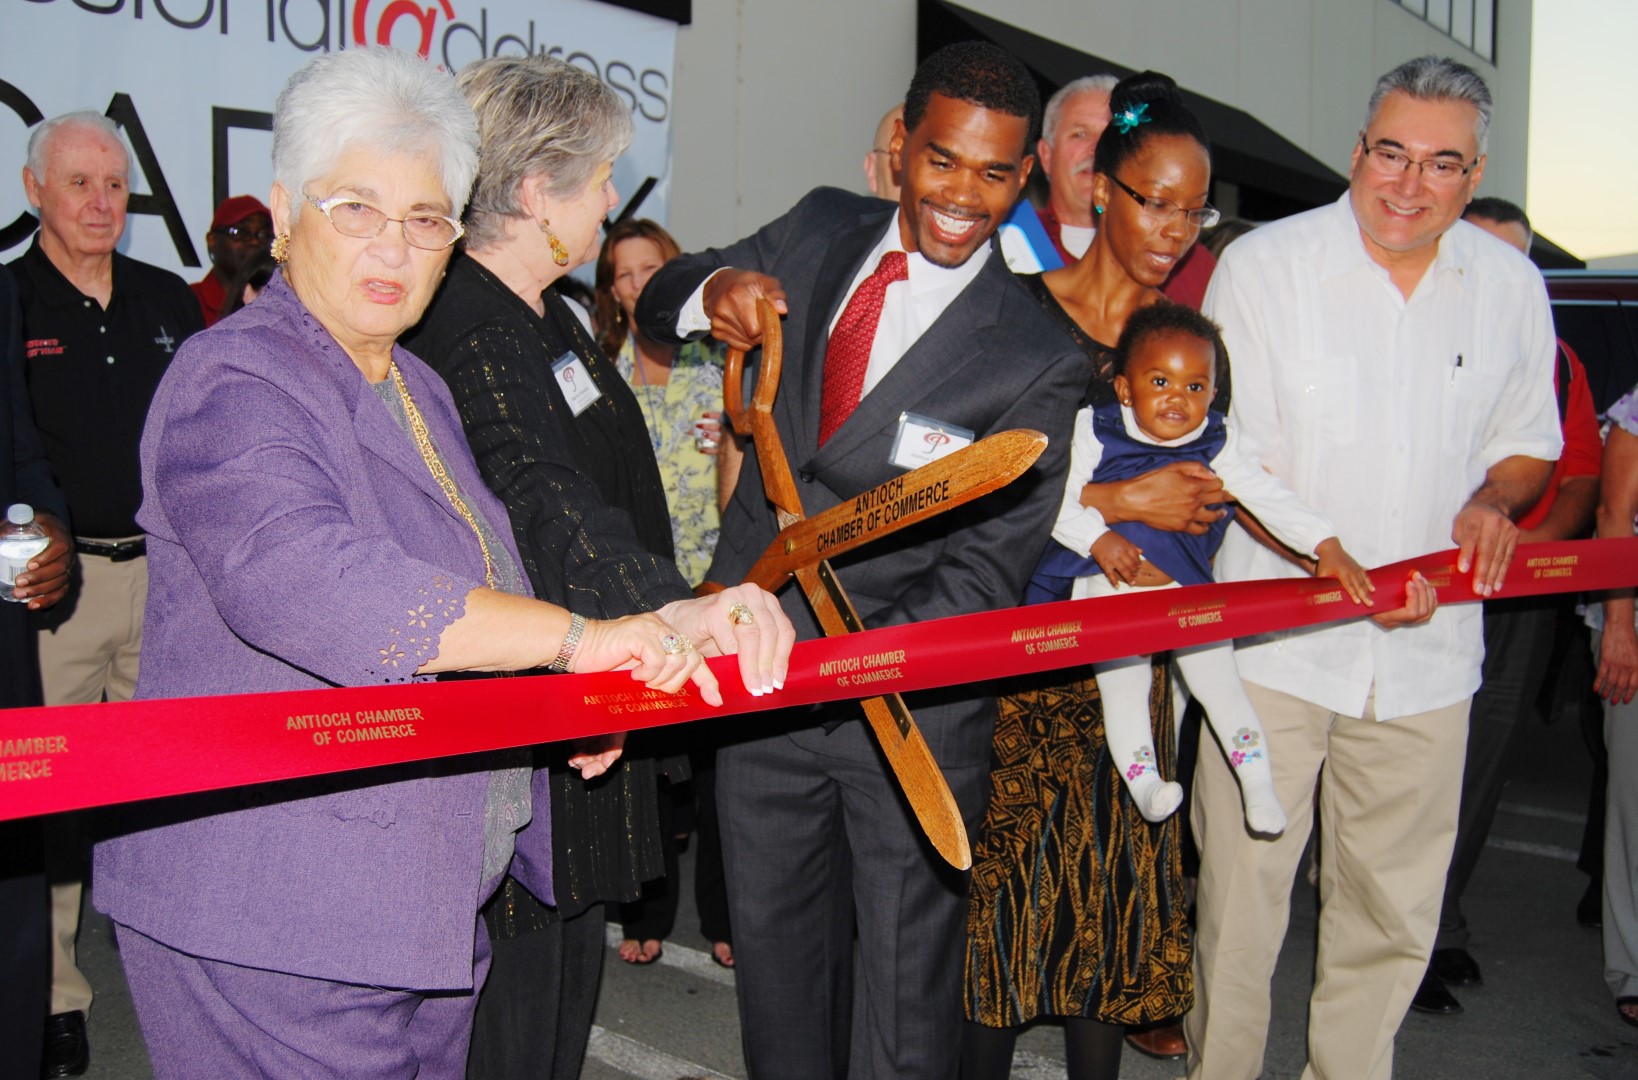 Professional Address CEO and Founder Joshua Samuel cuts the ribbon as Antioch Mayor Pro Tem Mary Rocha, left, Josh's wife and baby, and Councilman Tony Tiscareno assist.